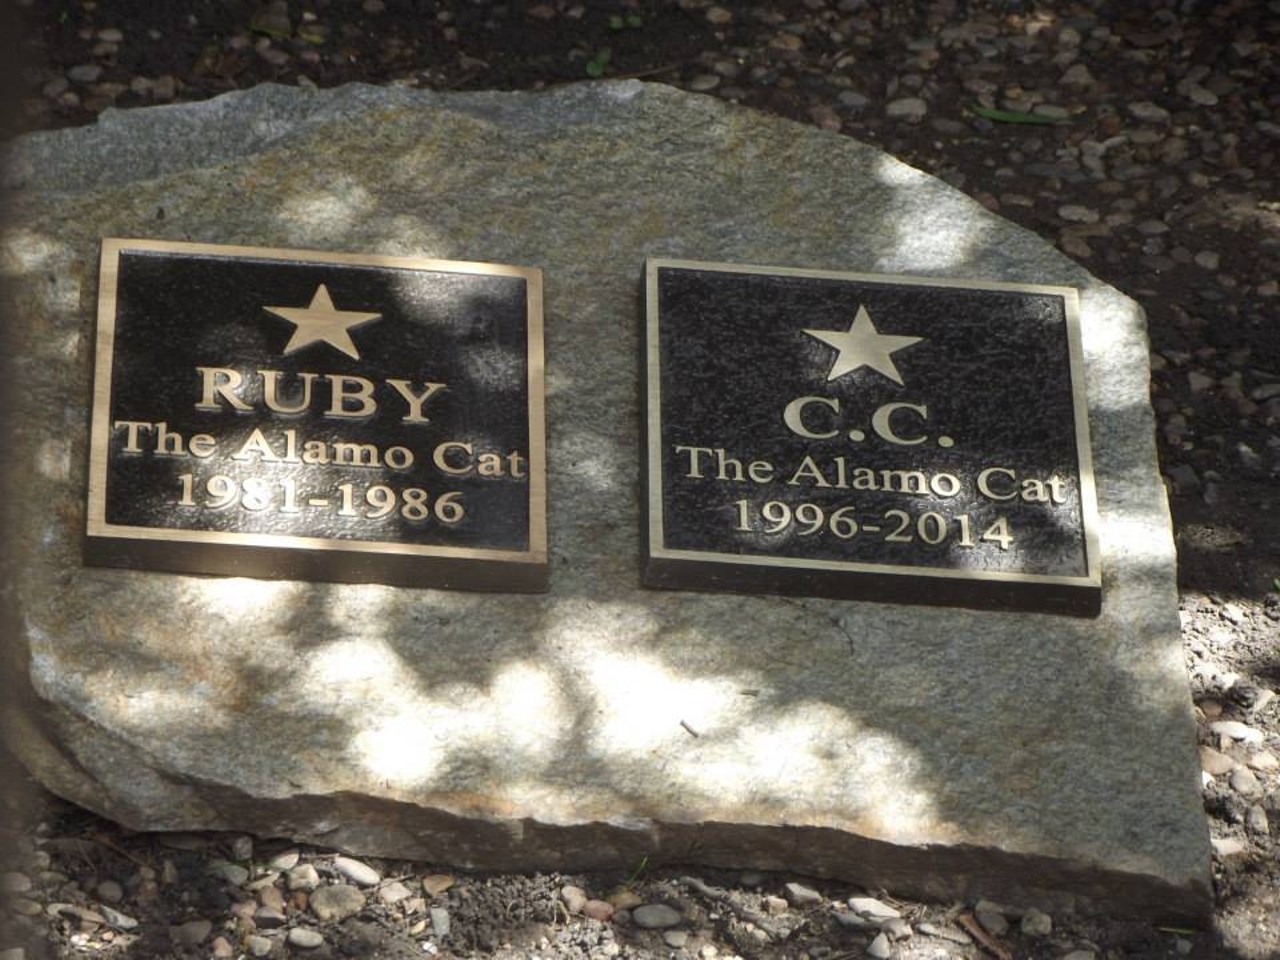 The Alamo cat graves
300 Alamo Plaza, thealamo.org
The Alamo may get its own share of visitors every year, but cat lovers should make it a task to sneak a peek of the graves of the cats that called the Alamo home. No, they weren’t alongside the “heroic” Texans at battle in 1836. Ruby was the Alamo Cat in the ‘80s while C.C was more recent. Don’t forget to pay your respects, fam.
Photo via Facebook / Darlene Parker Dickerson